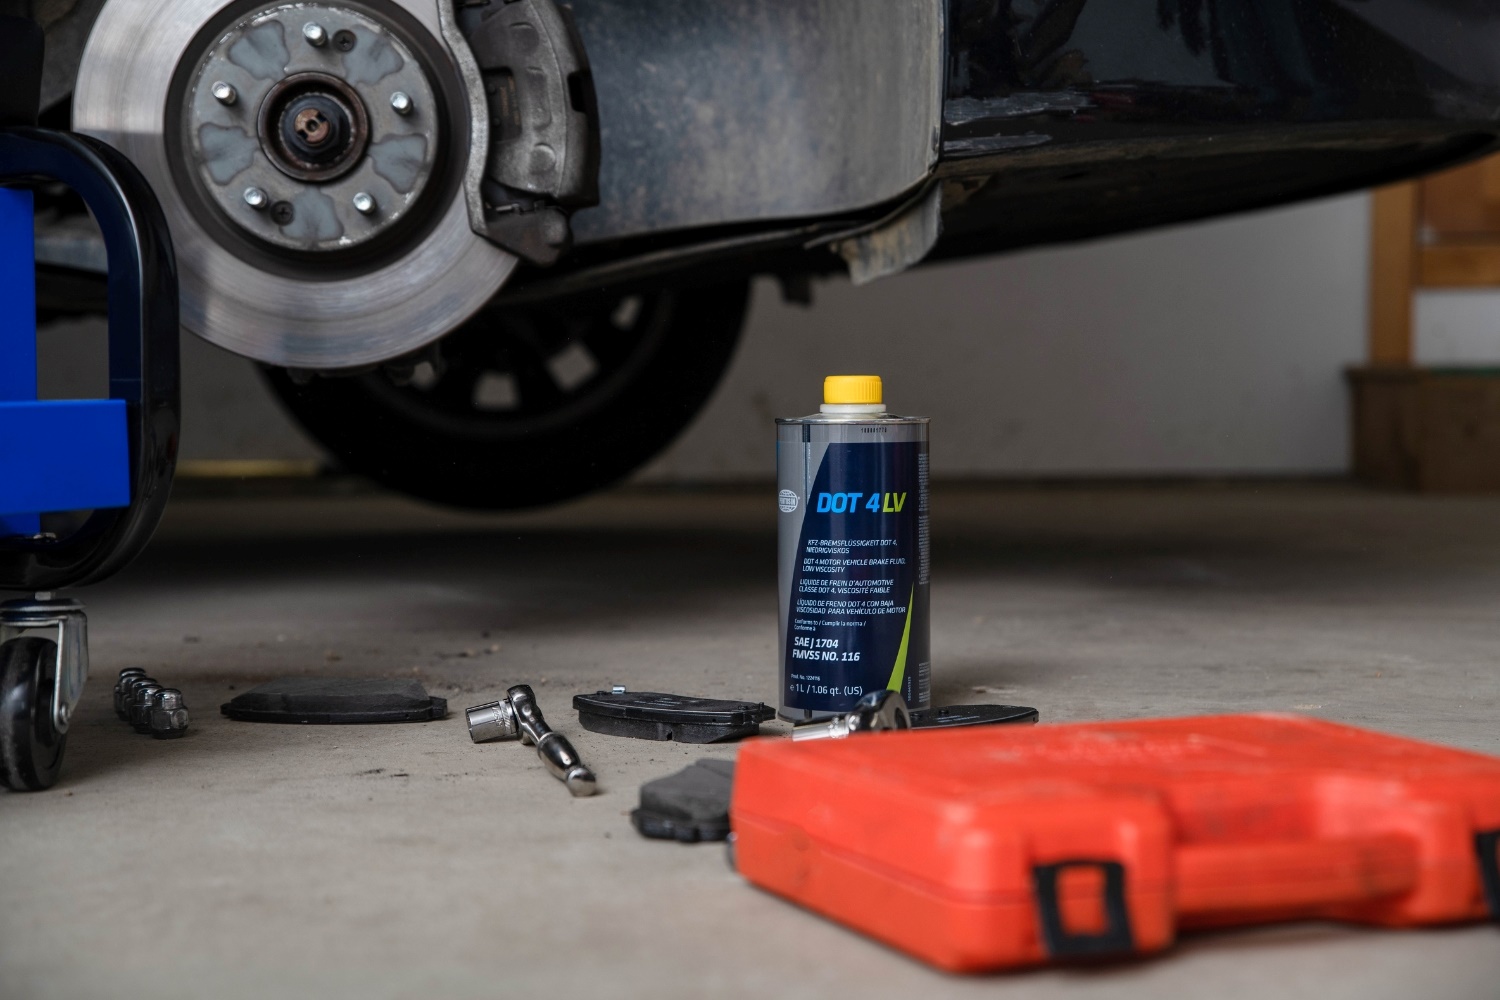 Discover The Secret To Stop Brake Fluid Leaks Instantly – No Repairs Needed!